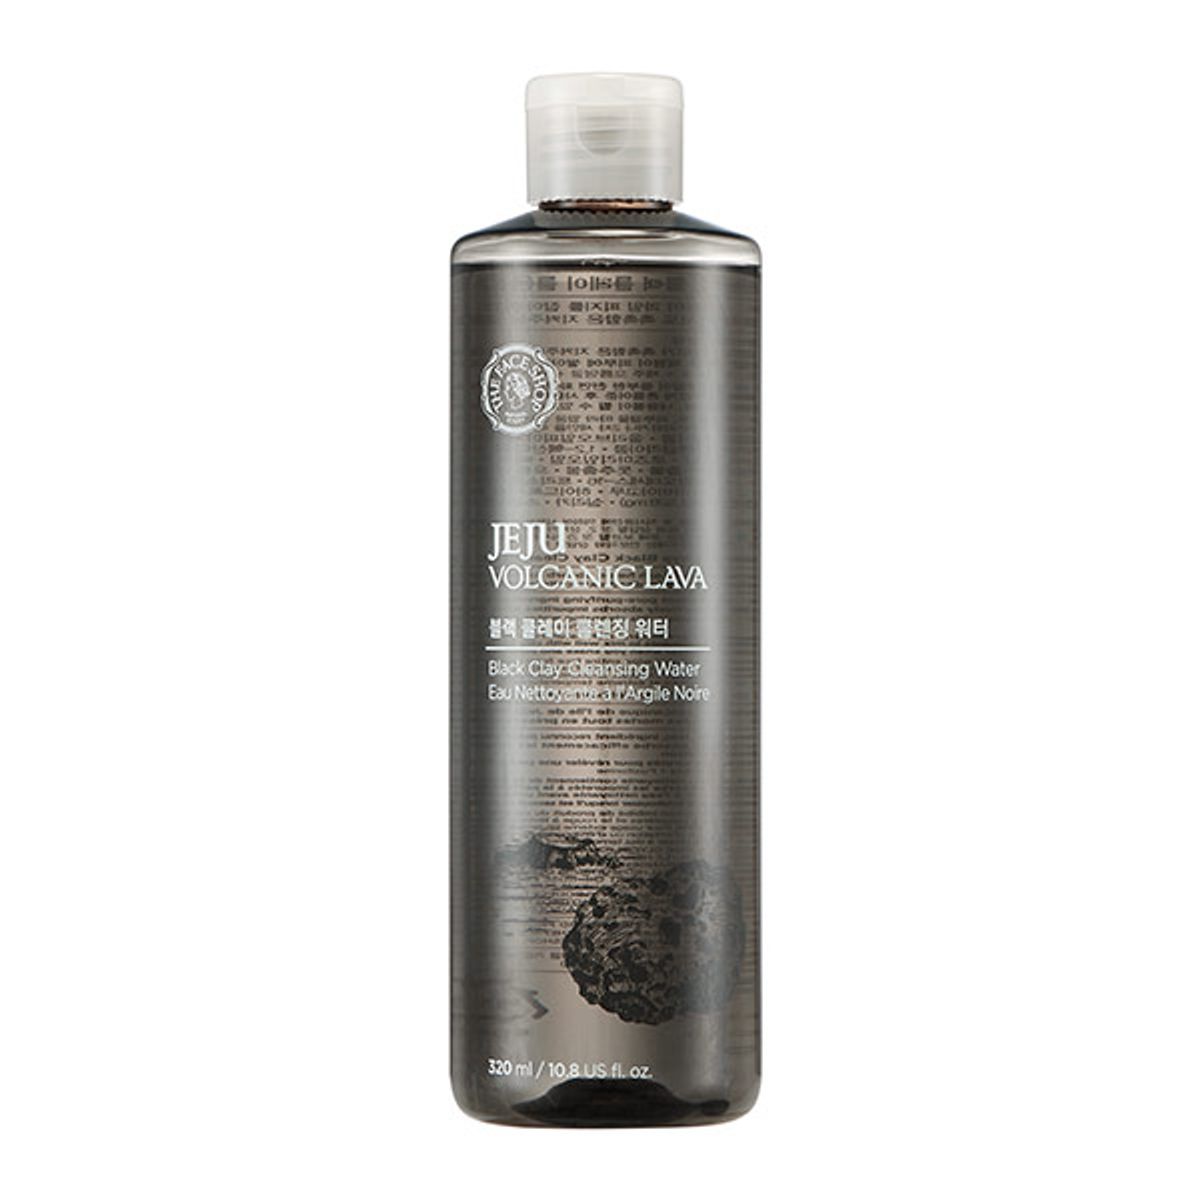 nuoc-tay-trang-tfs-jeju-volcanic-lava-black-clay-cleansing-water-320ml-1